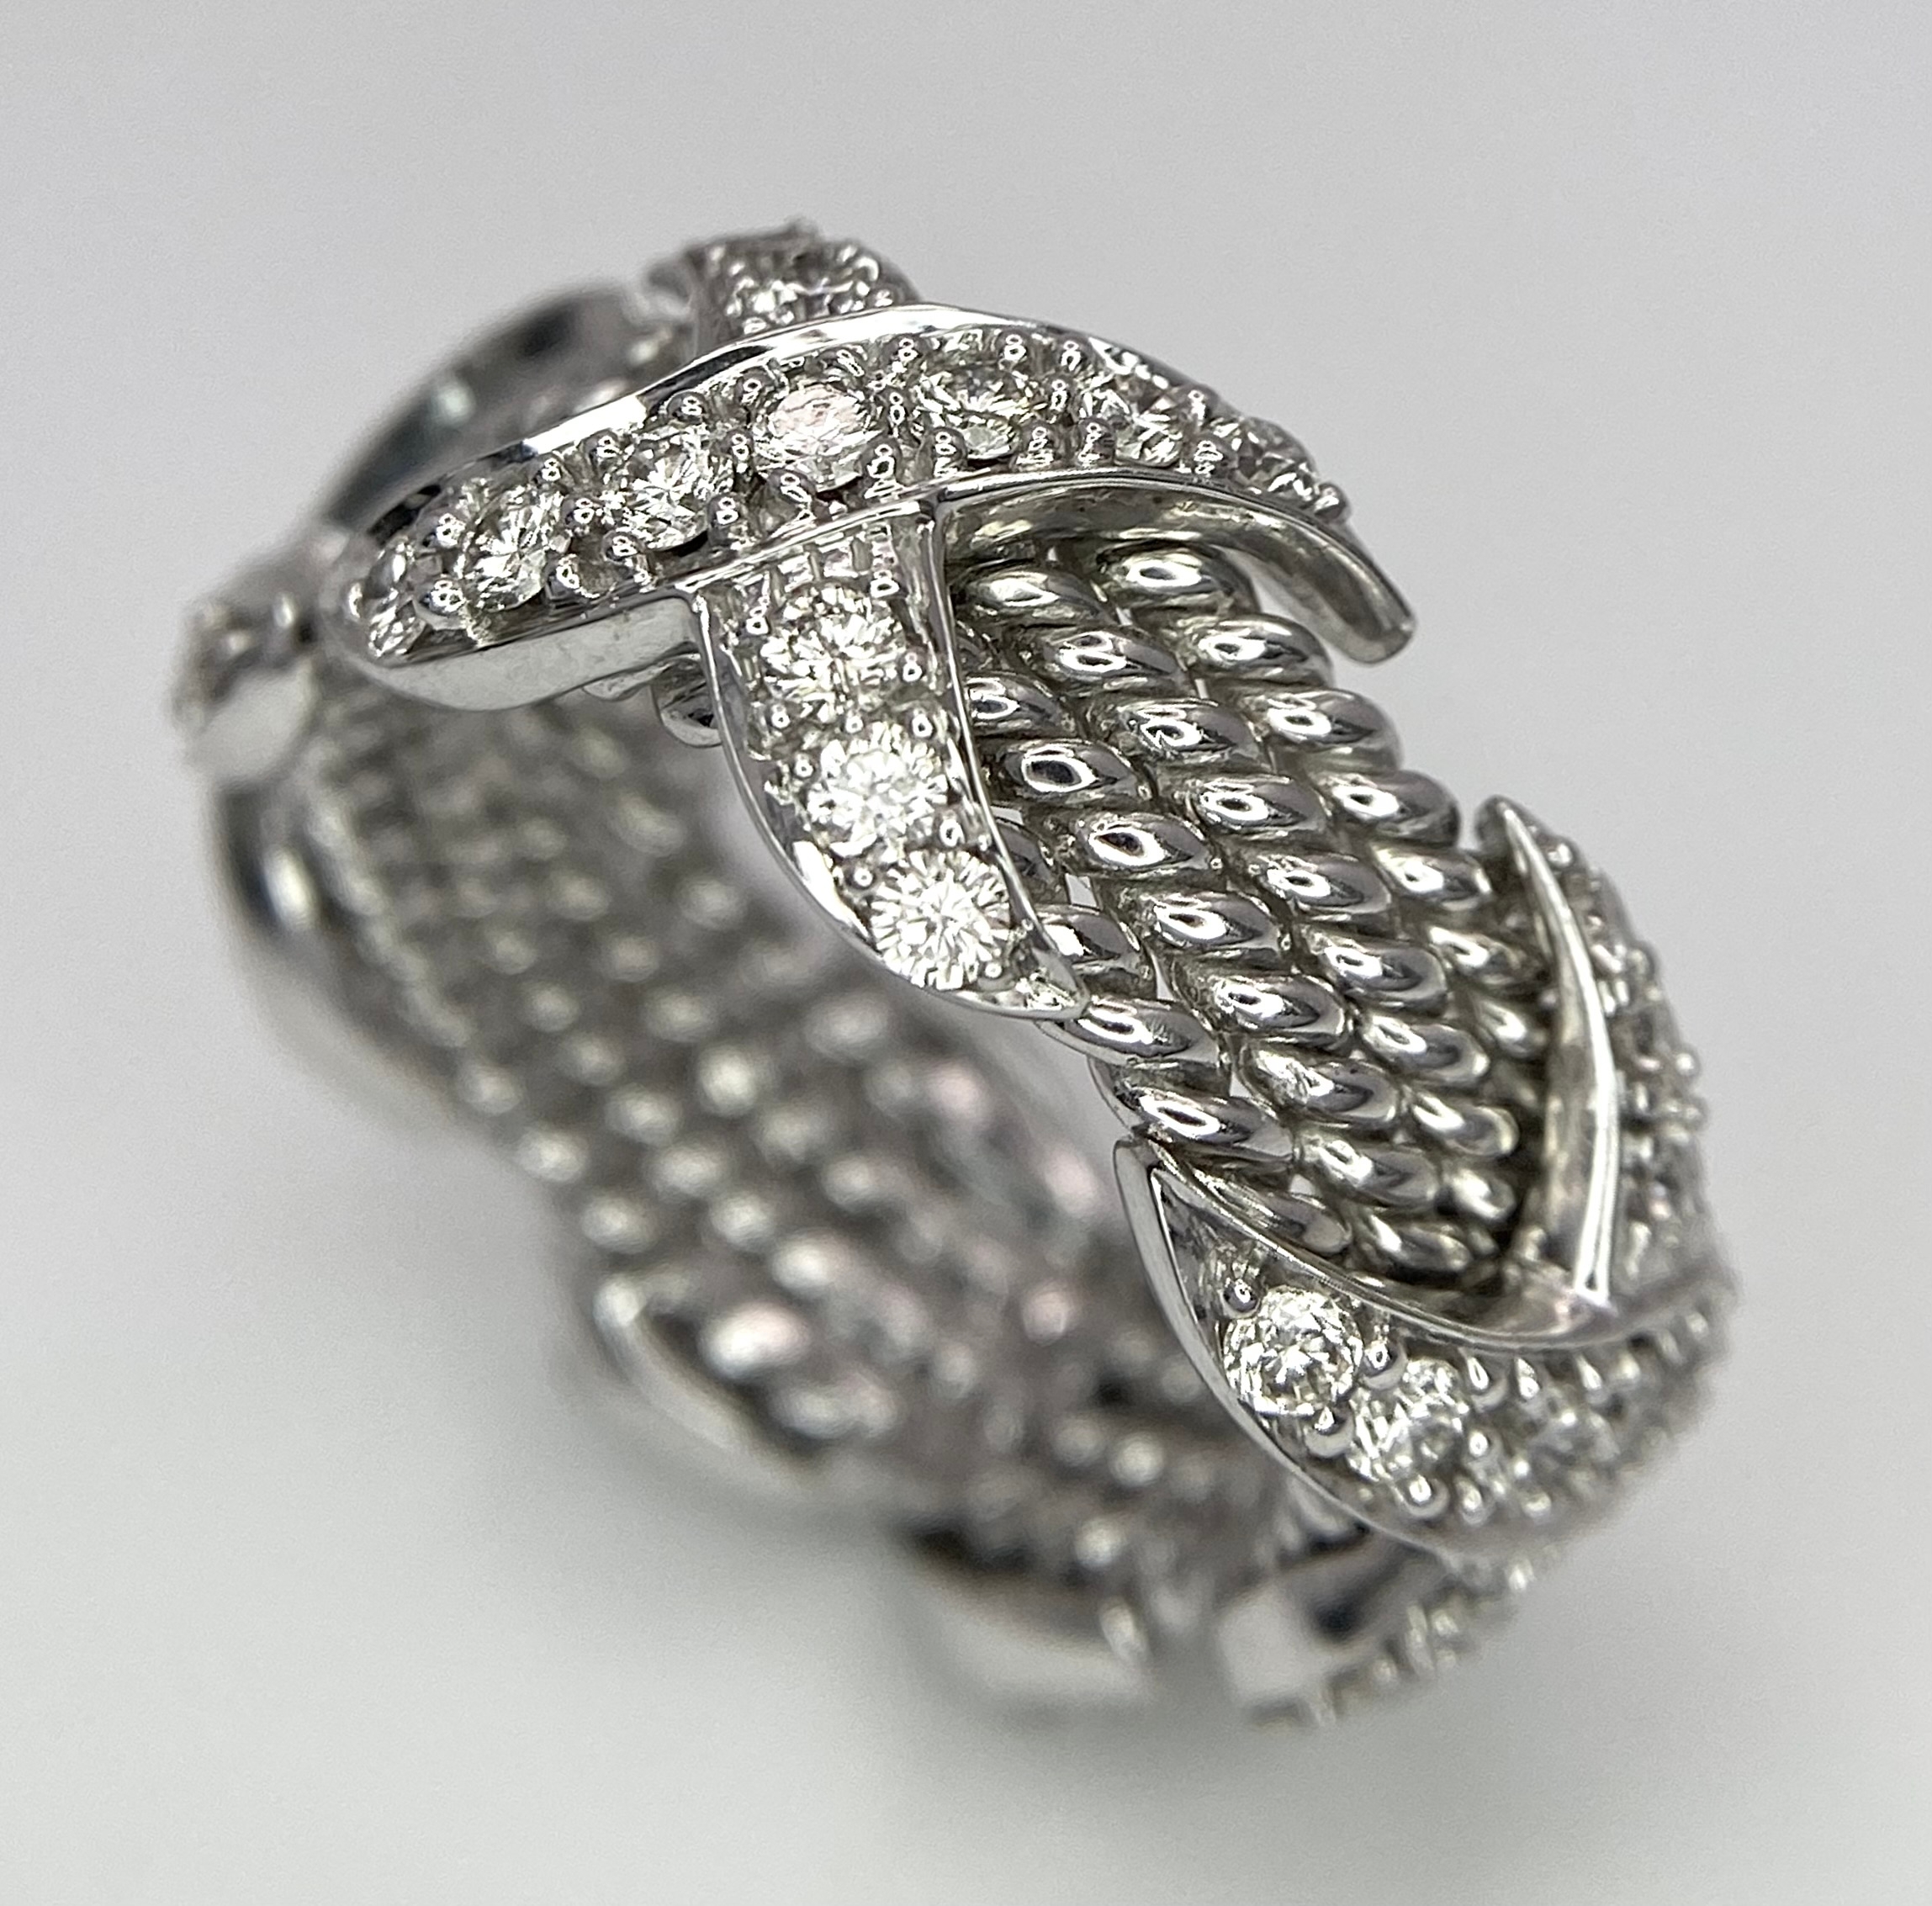 A 9K WHITE GOLD FANCY DIAMOND KISS RING. 0.80ctw, Size K, 6.6g total weight. Ref: SC 8051 - Image 2 of 6